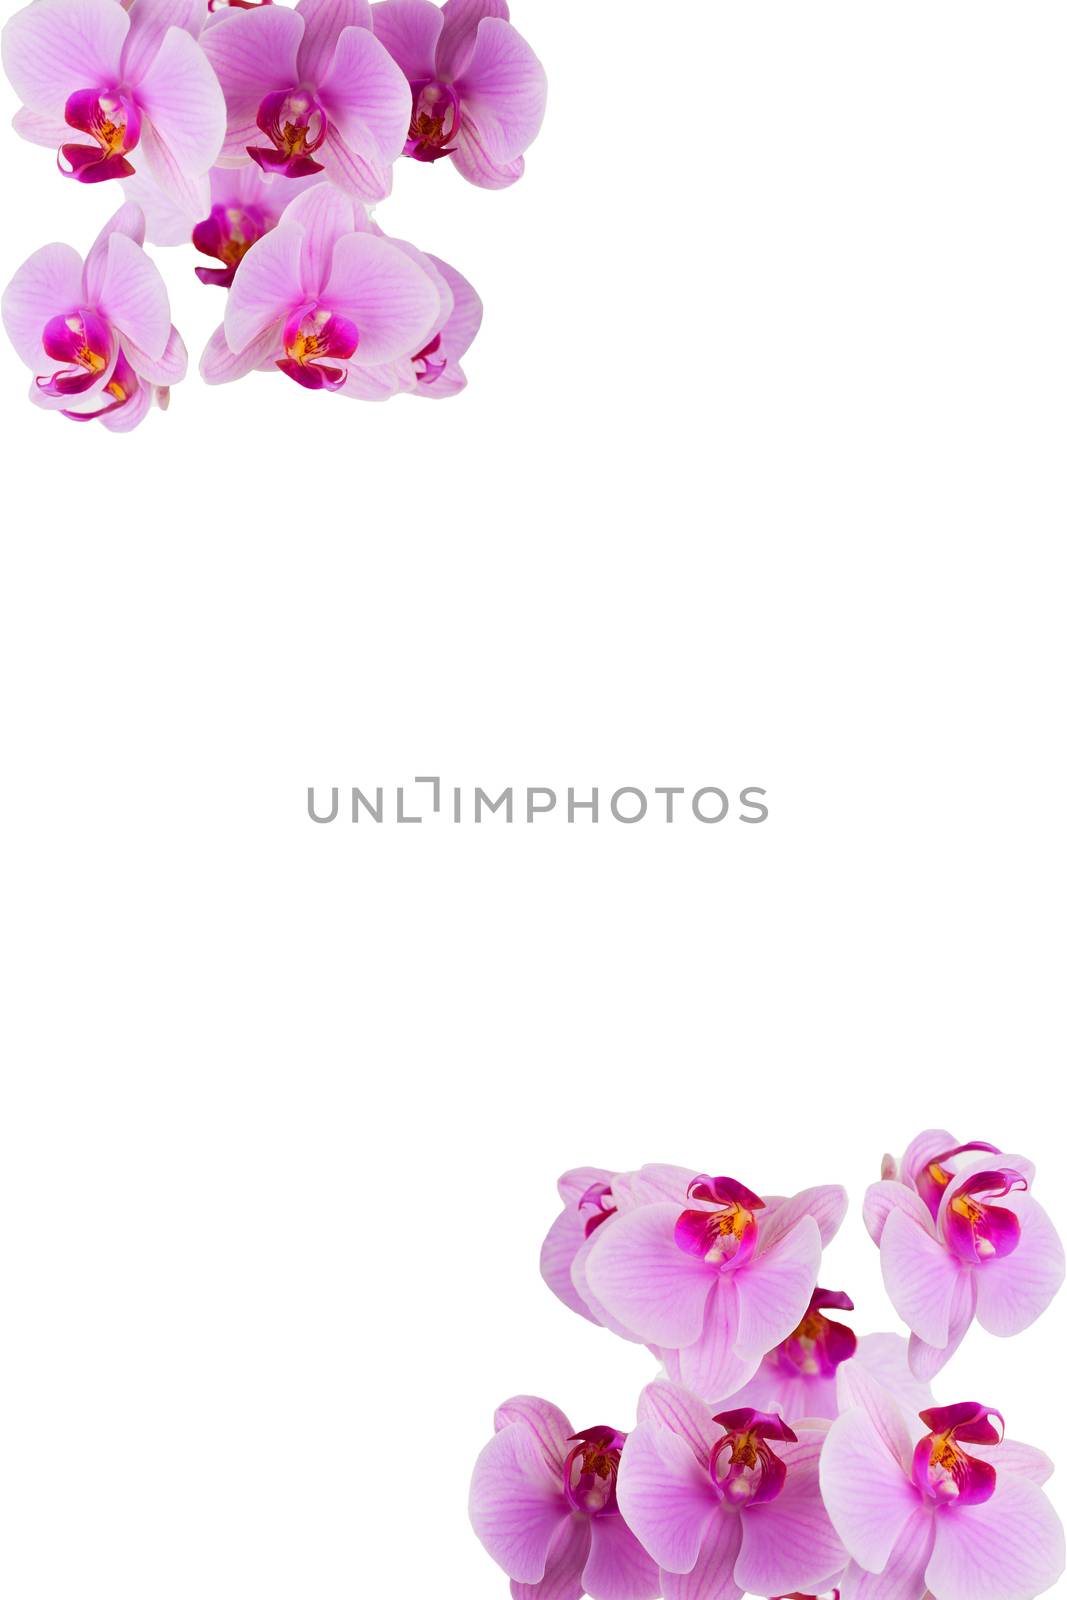 Flowers on a vertical background